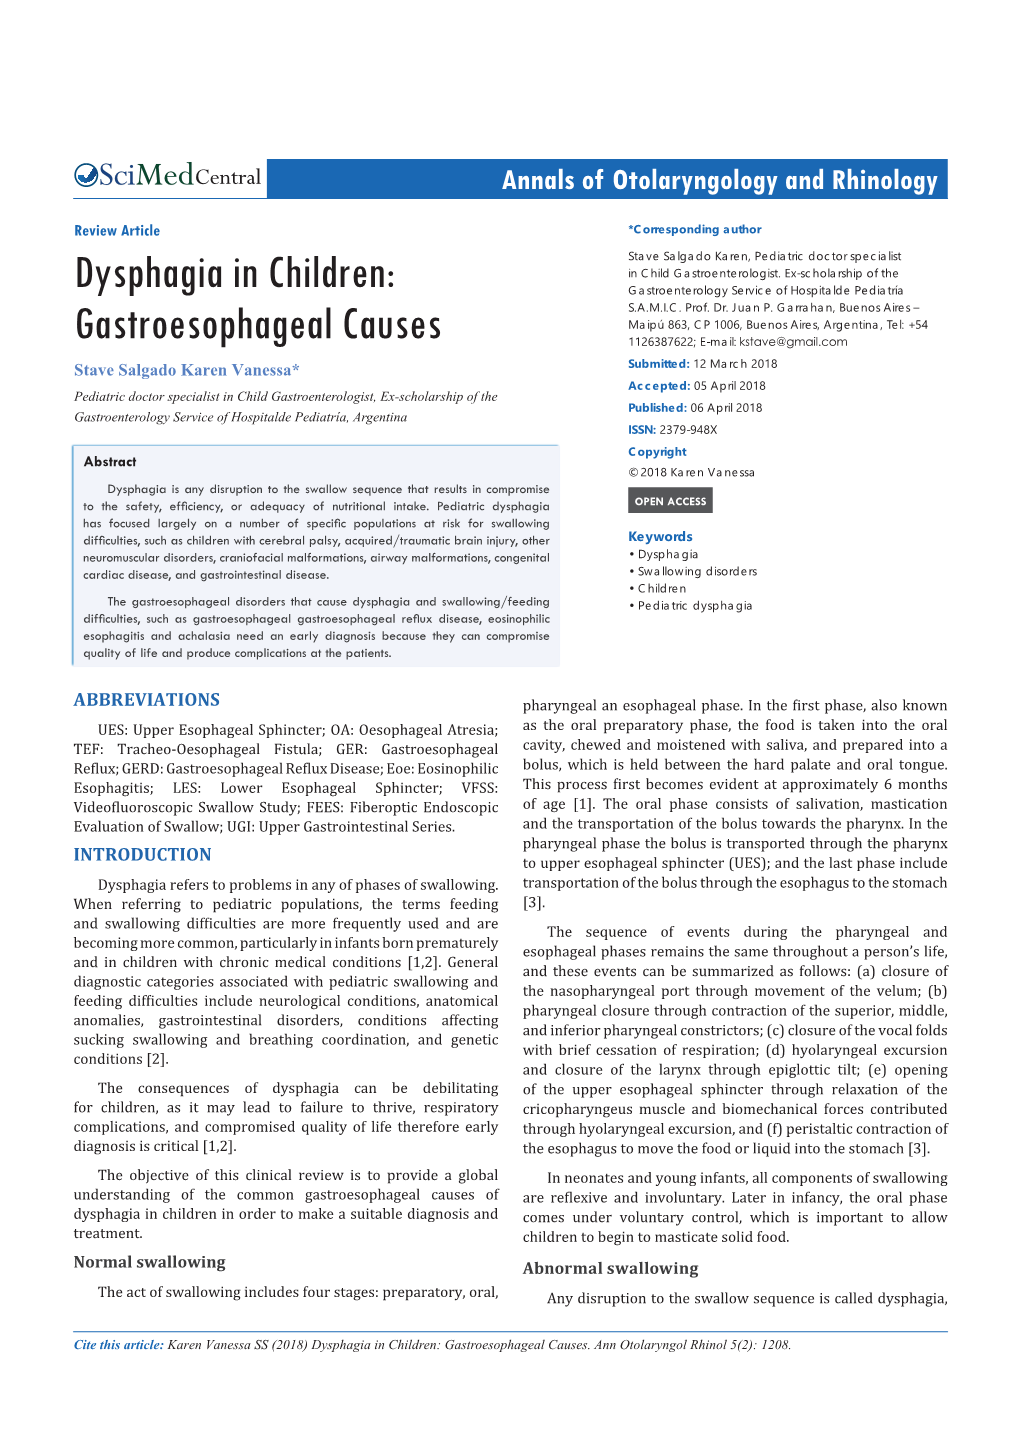 Dysphagia in Children: Gastroesophageal Causes